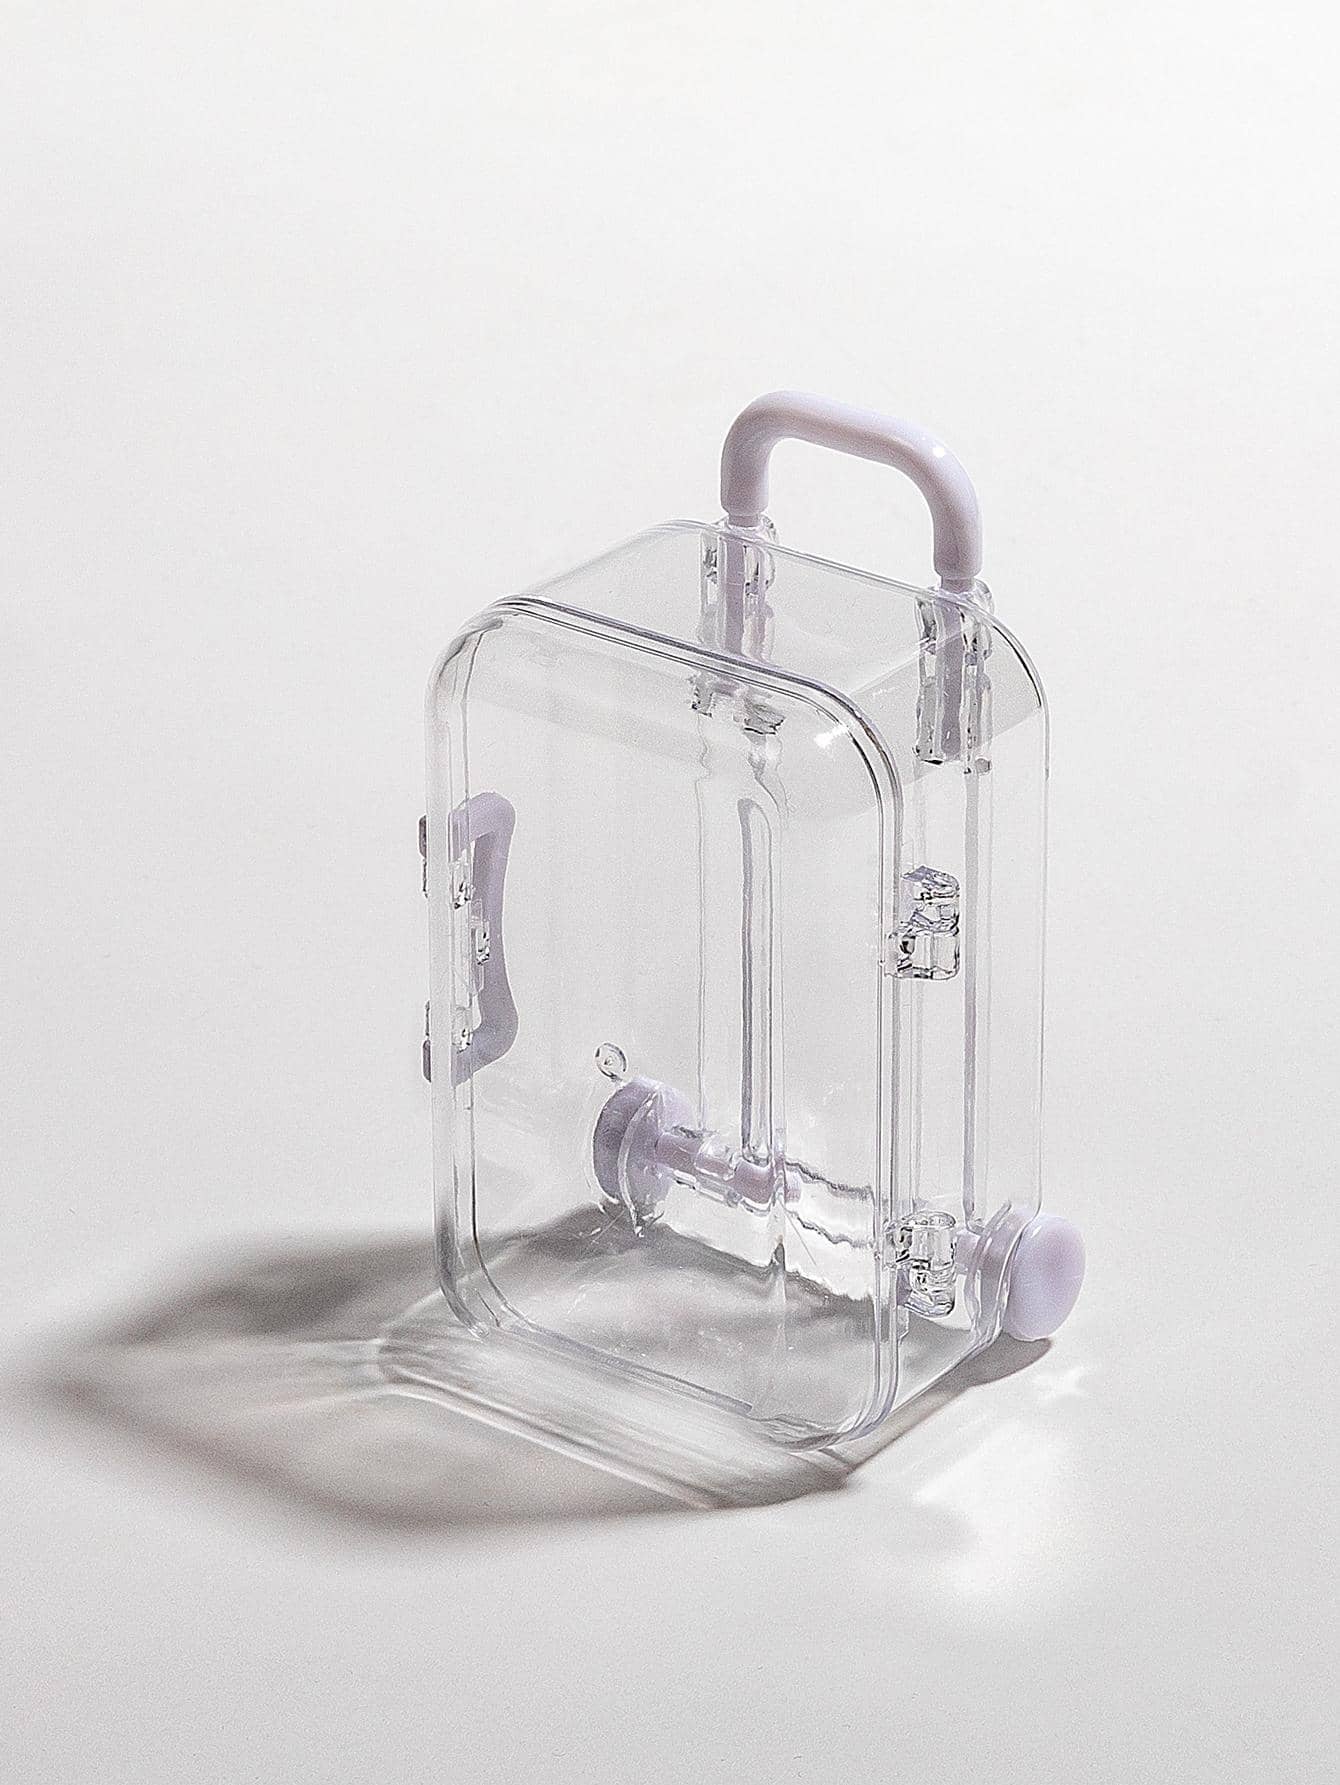 1Pc Transparent White Suitcase Shaped Jewelry Box, Cute Plastic Jewelry Storage Box for Household